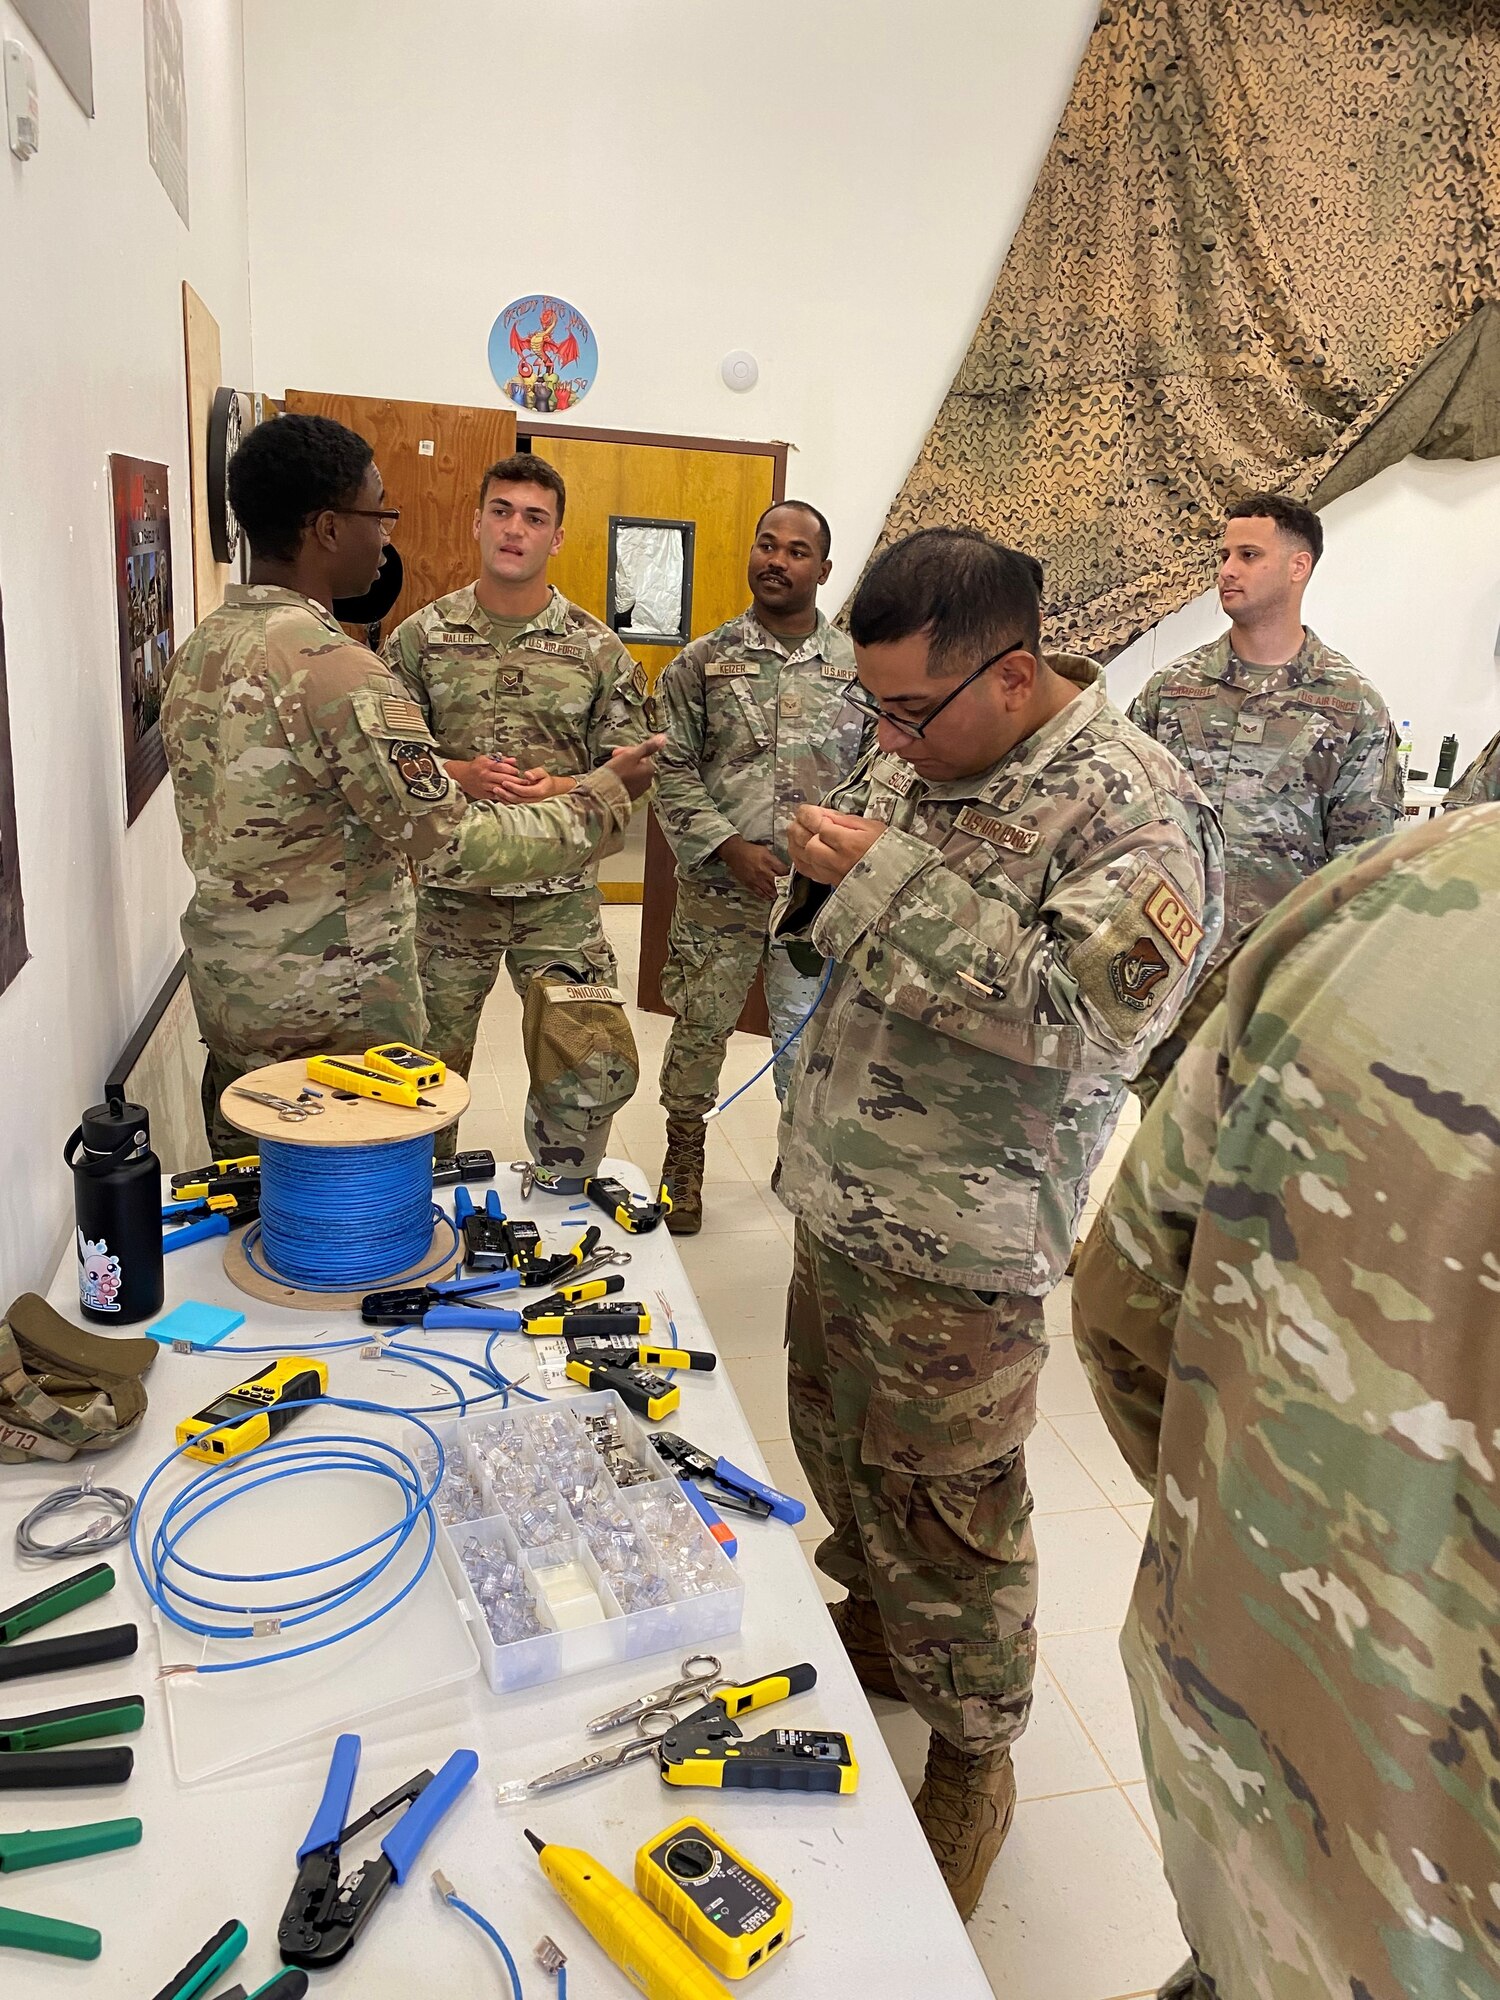 The 36th Contingency Response Group (CRG) embarked on a 6-month training plan to leverage the 52 different AFSCs and create synergy and interoperability amongst personnel and the teams. Each of the 5 squadrons developed training plans to teach Multi-Capable Airmen (MCA) skillsets to their battle buddies.